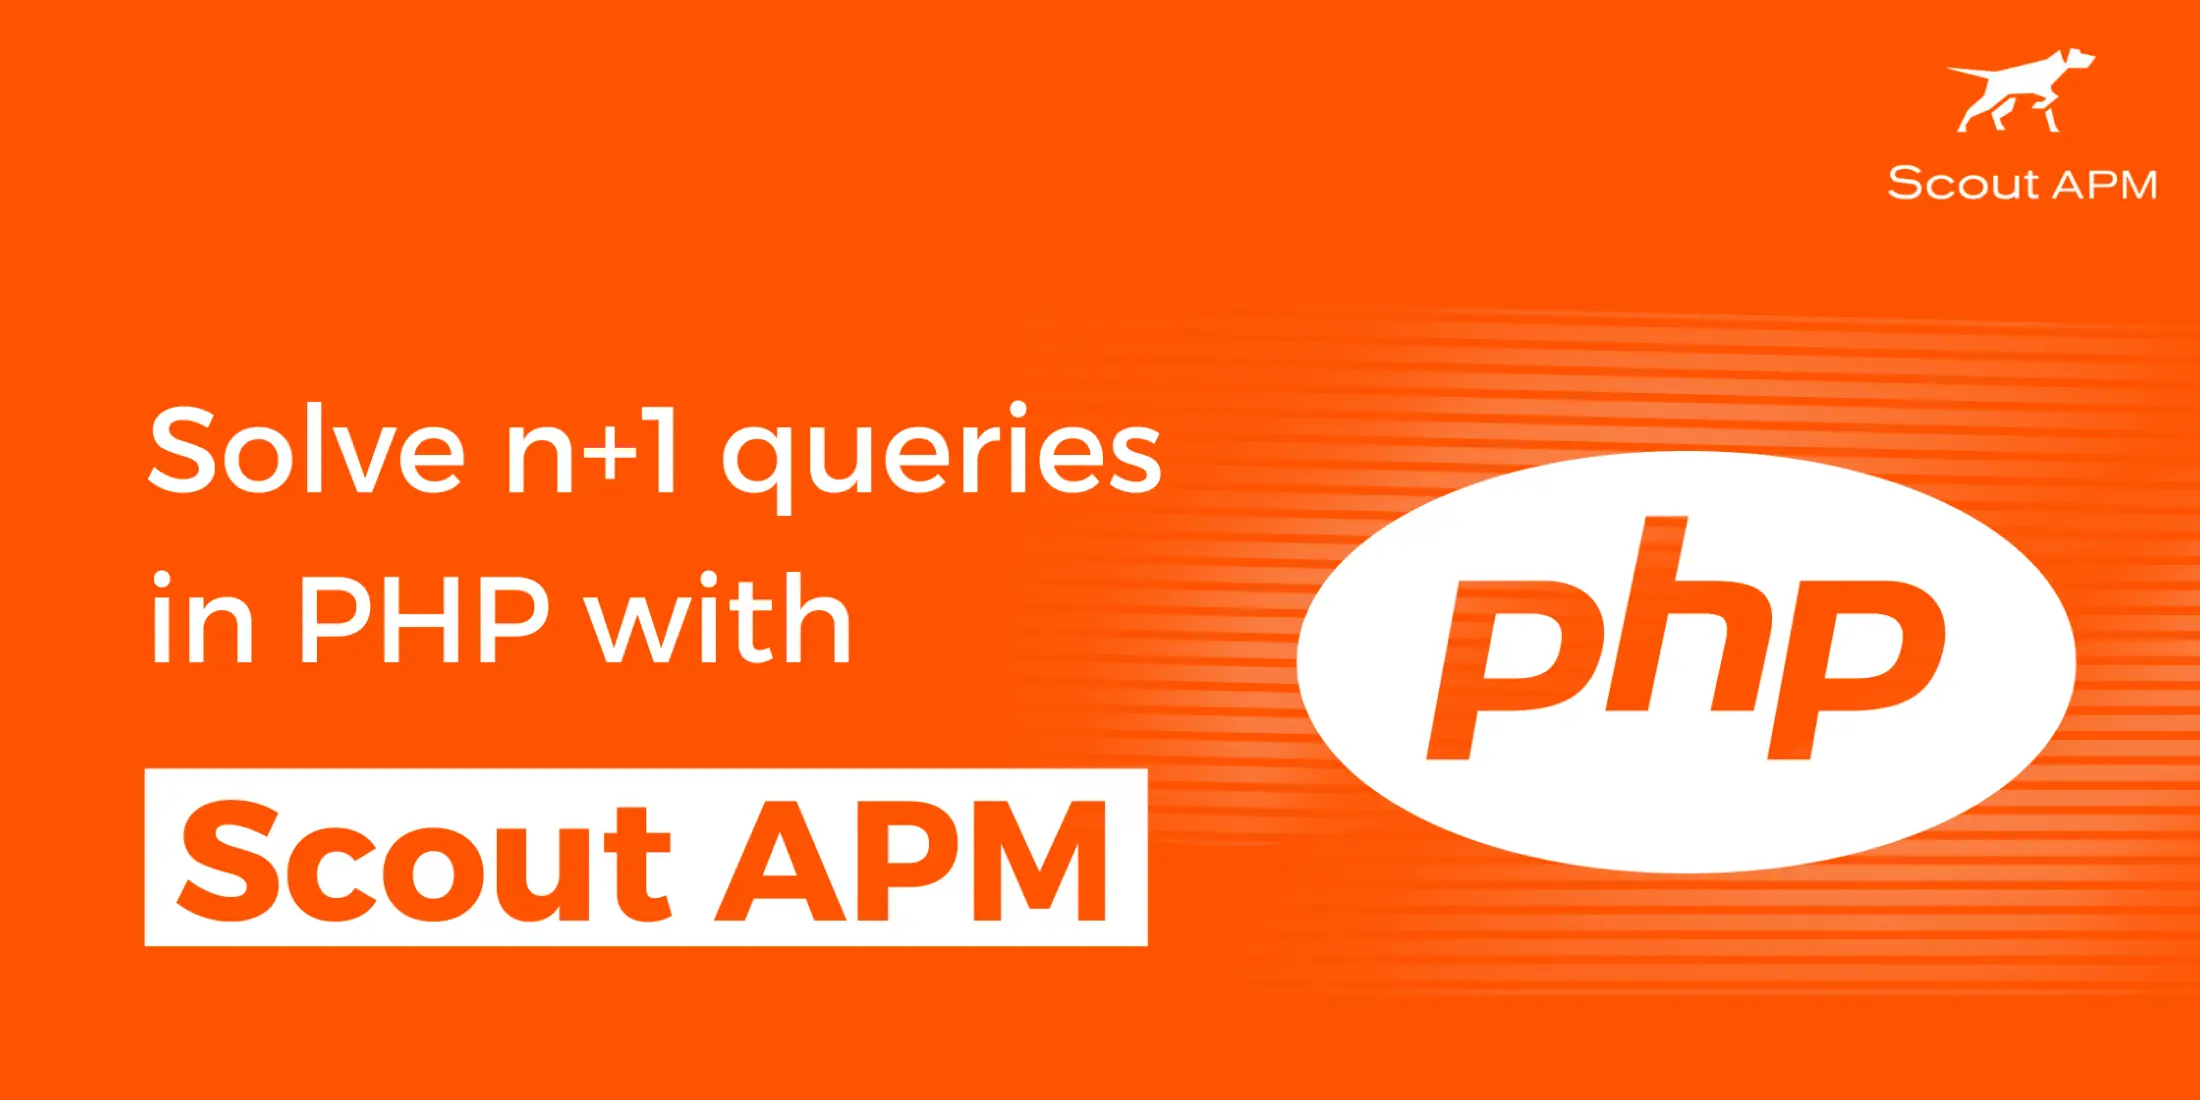 How to Detect n+1 Queries in PHP